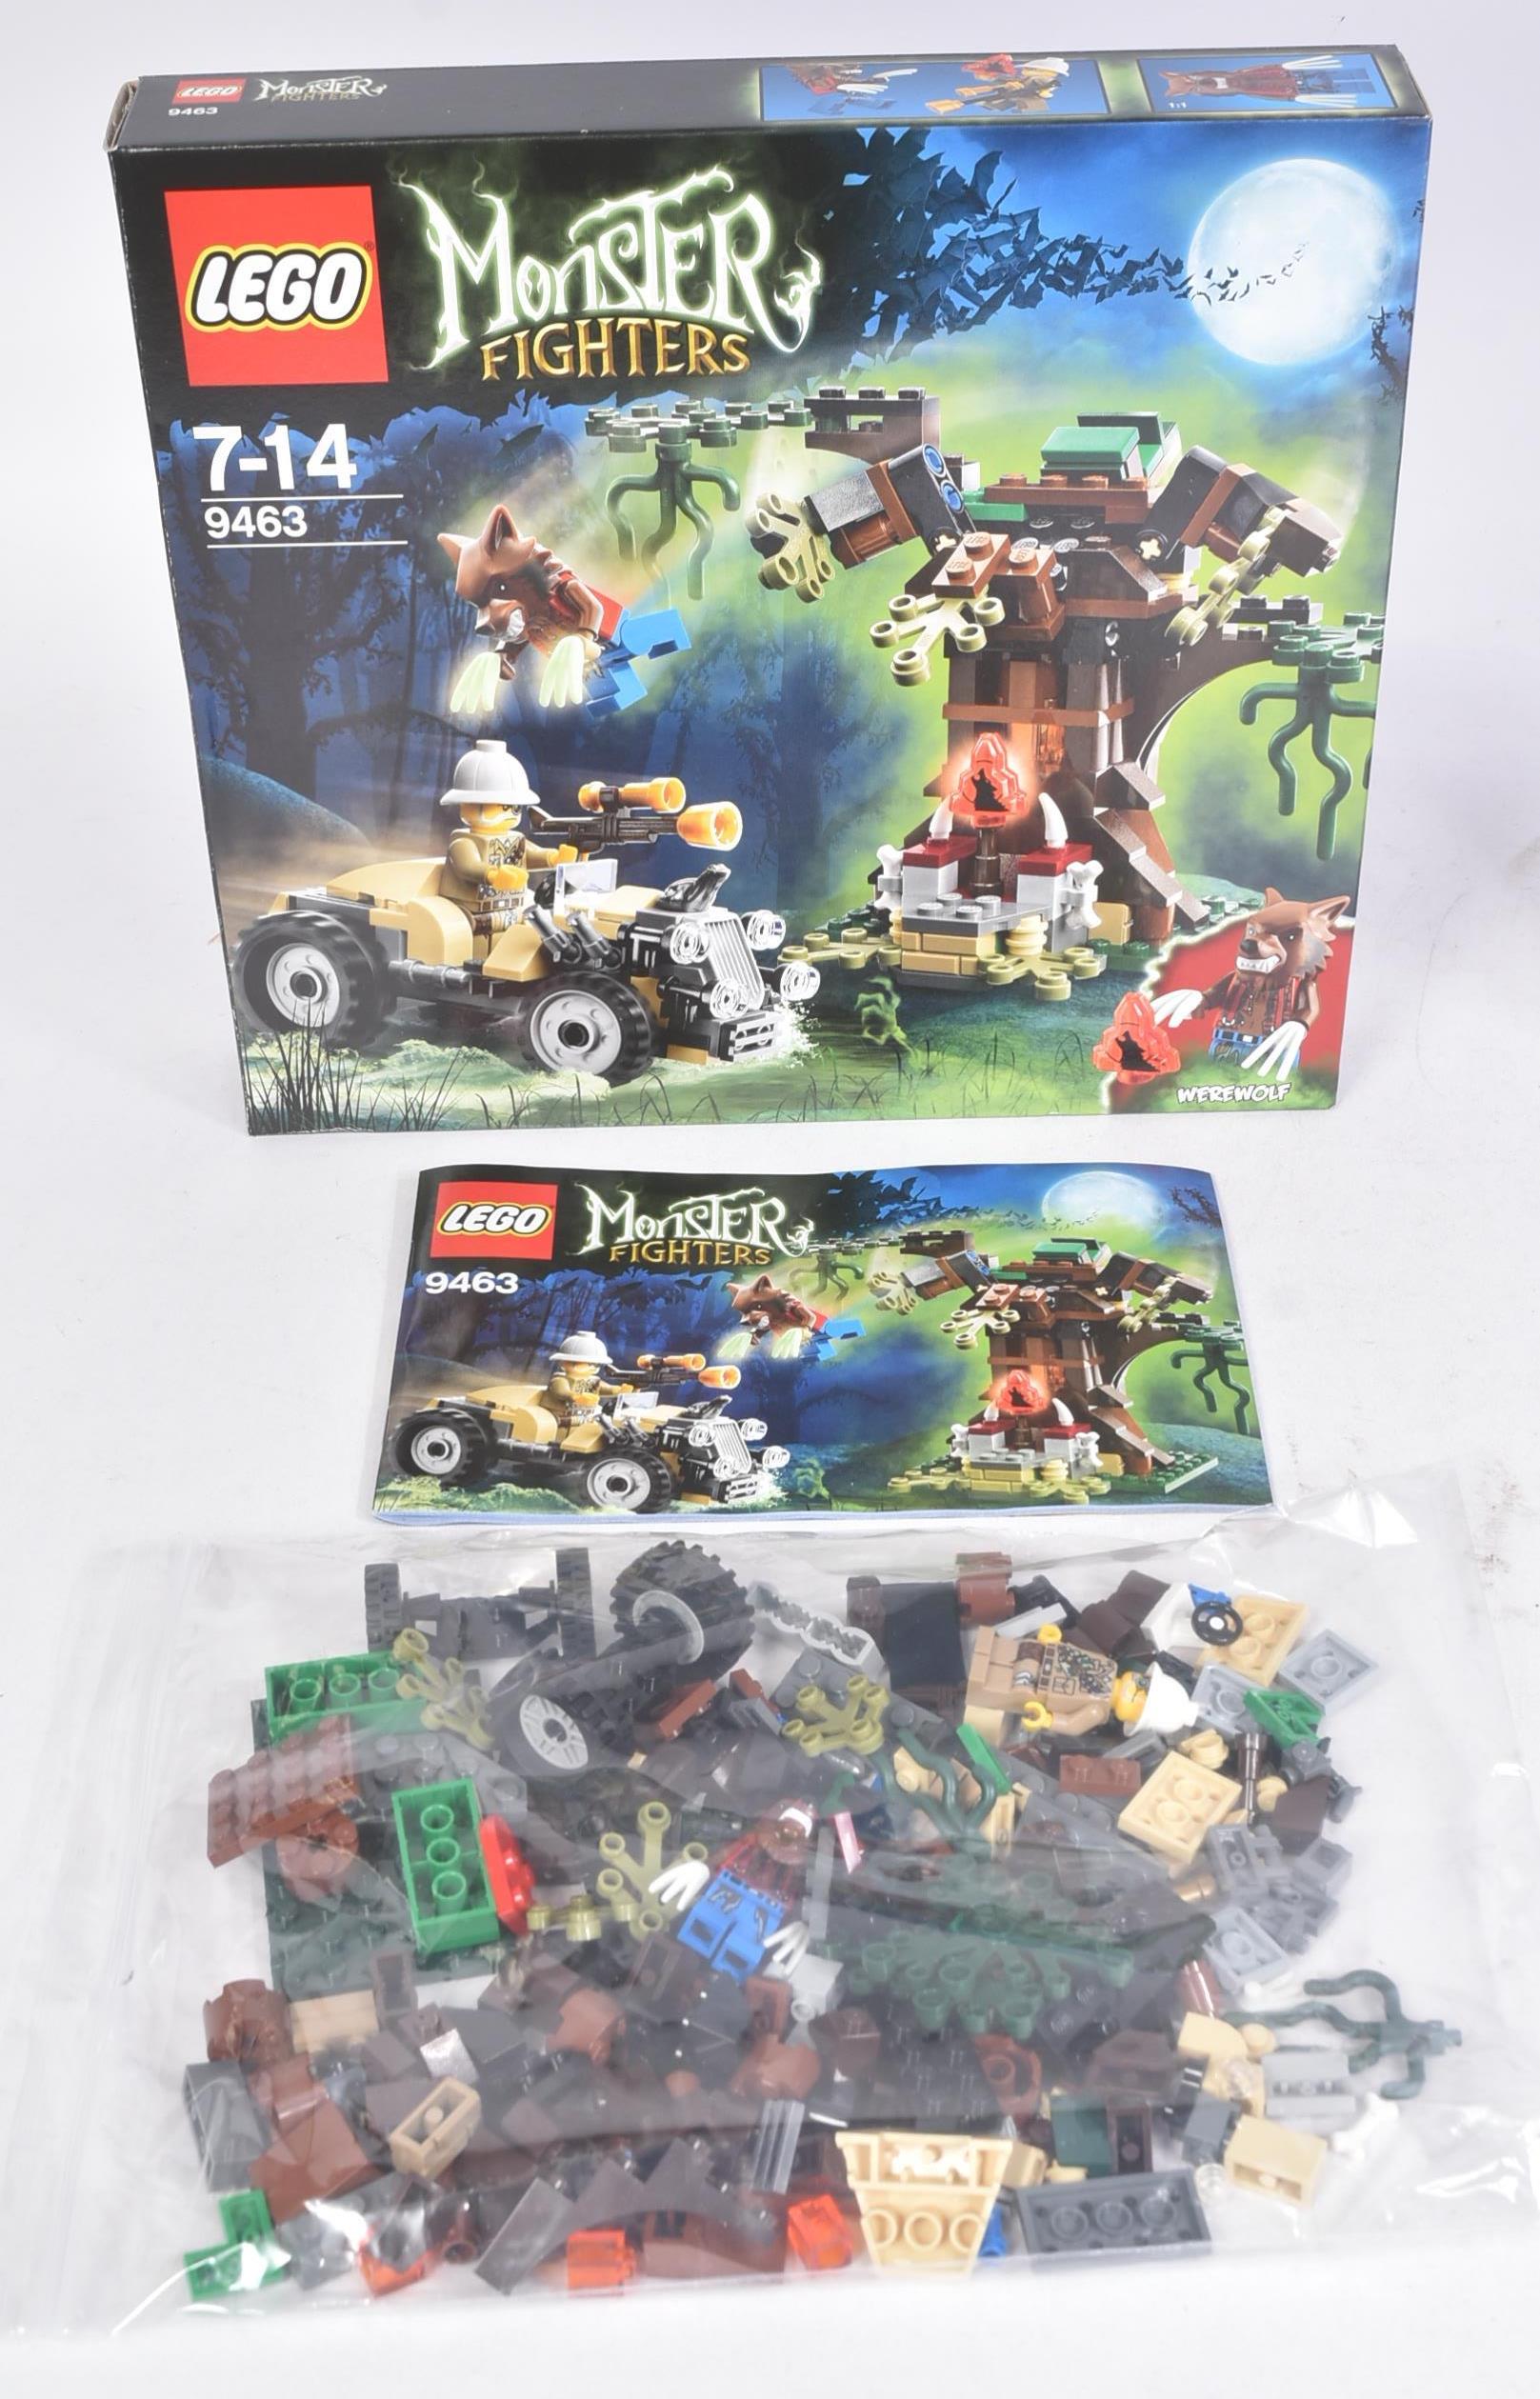 LEGO - MONSTER FIGHTERS - THE MUMMY & THE WEREWOLF - Image 2 of 5